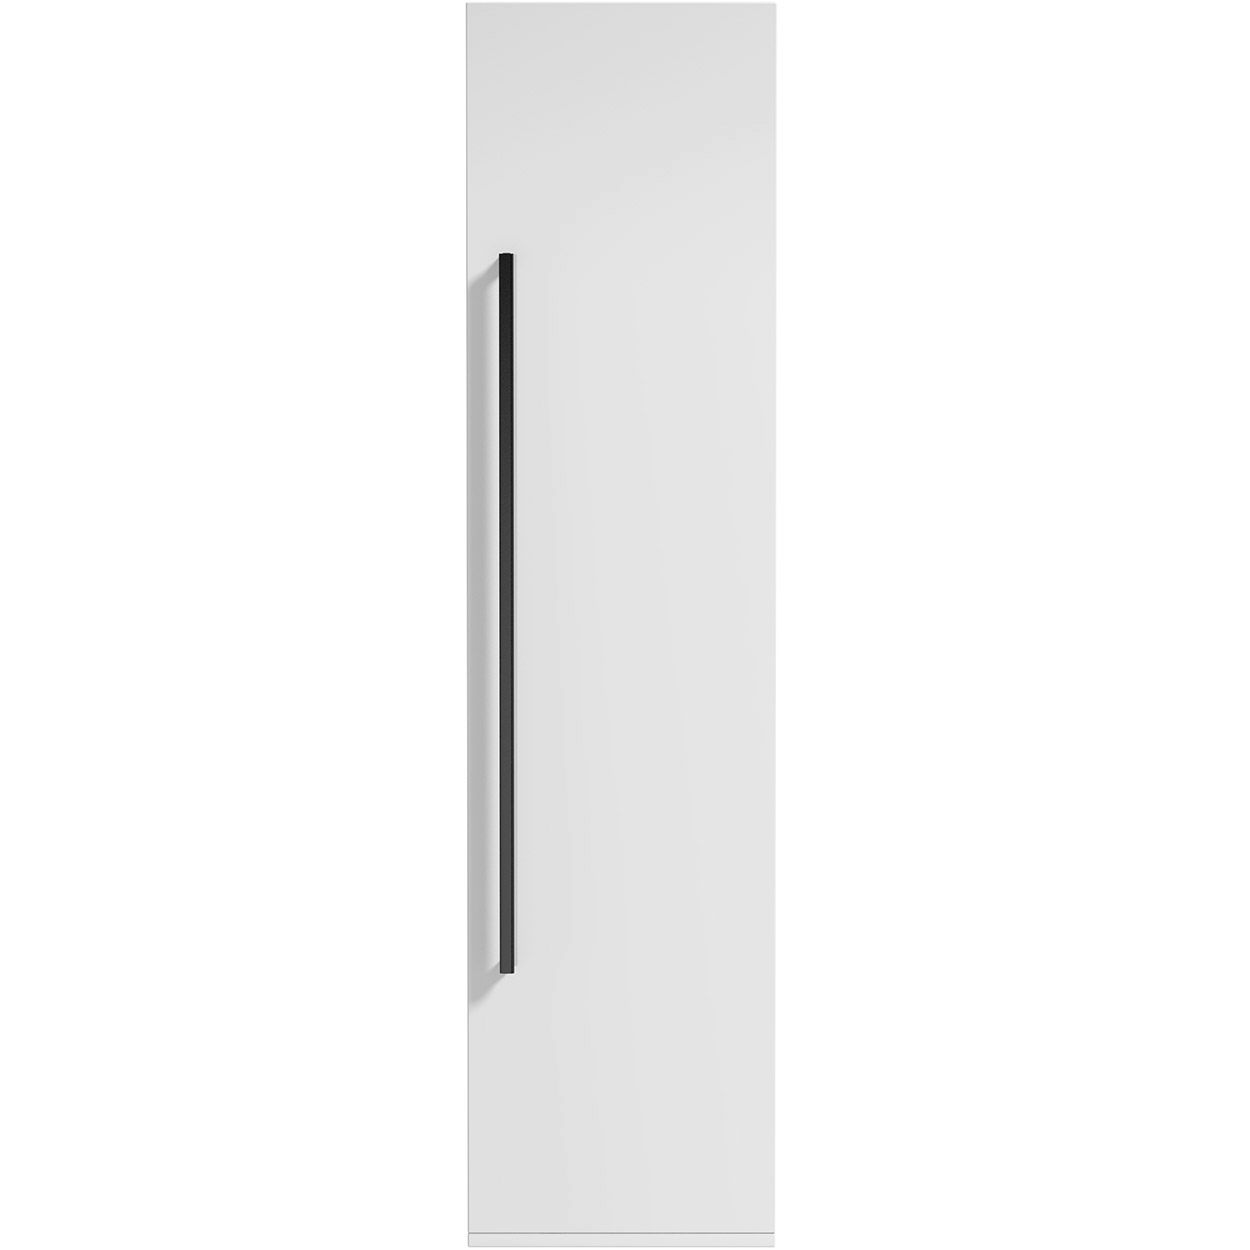 Orchard Derwent white tall wall hung cabinet 1400 x 350mm 